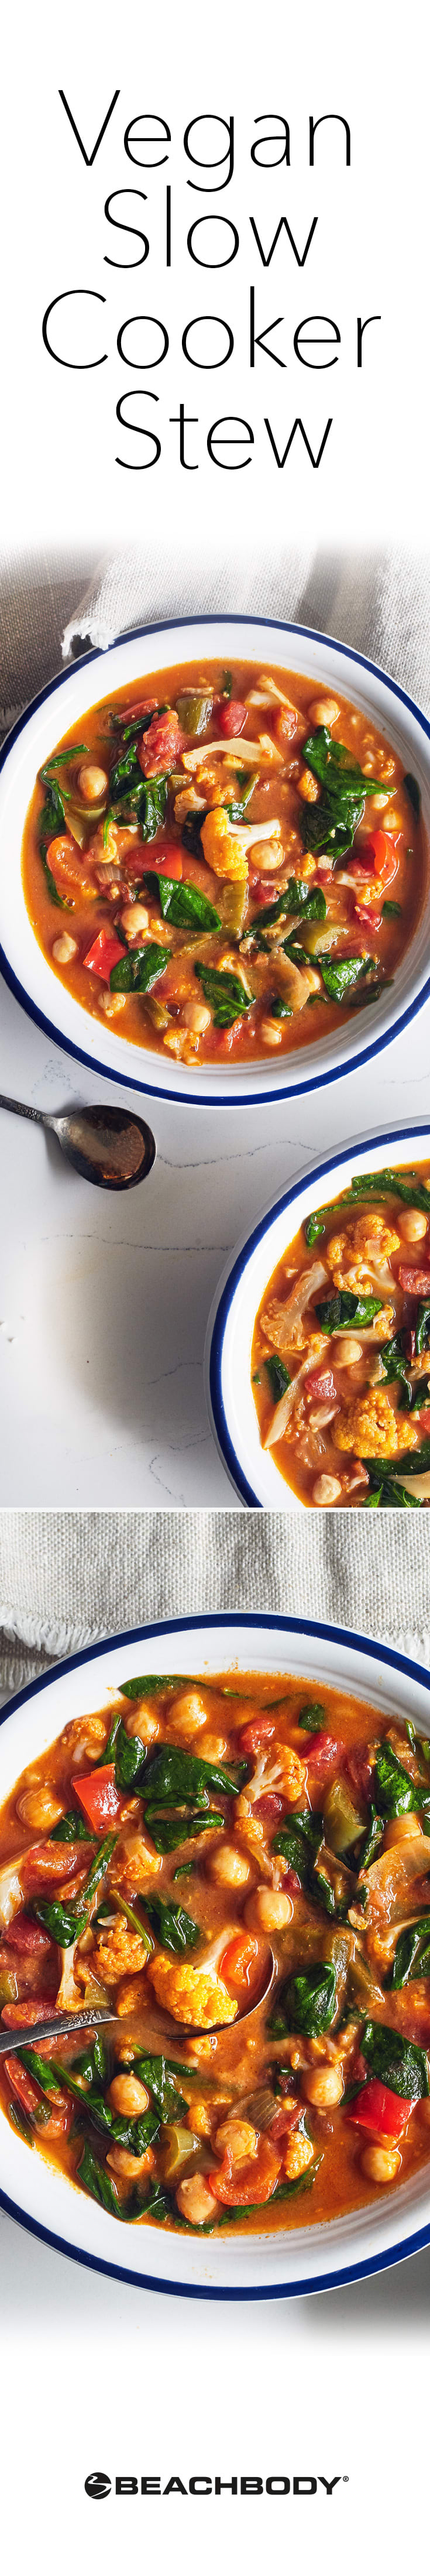 Vegan Slow Cooker Stew with Chickpeas and Spinach